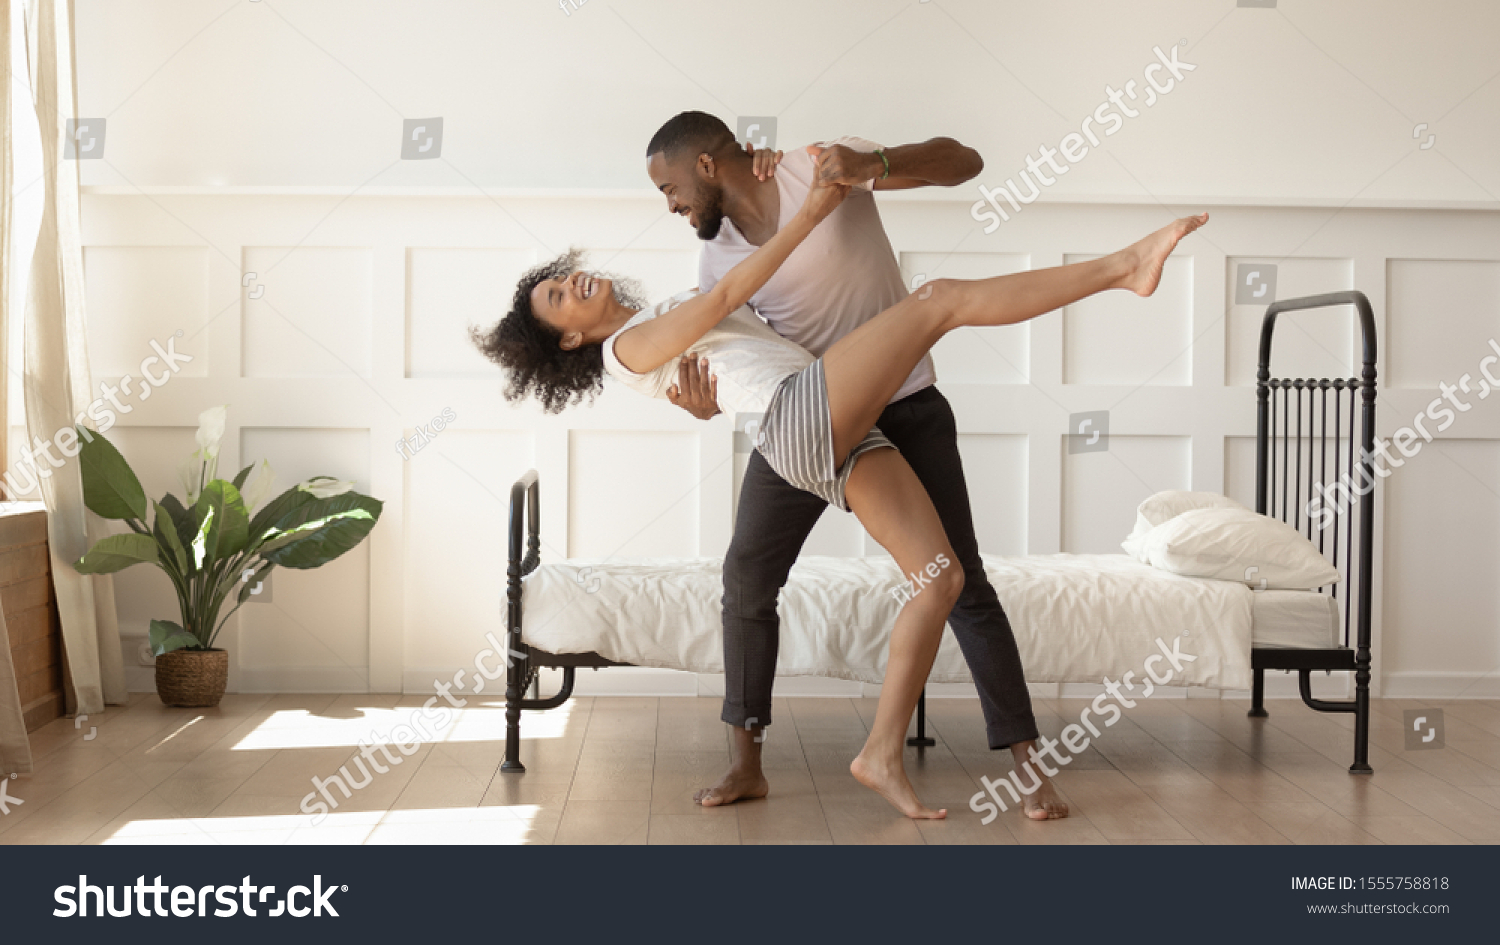 Excited african American millennial husband and wife dance swirl in bedroom, happy biracial mixed race dancer couple in pajamas have fun swaying together at home. Relocation, relationship goal concept #1555758818